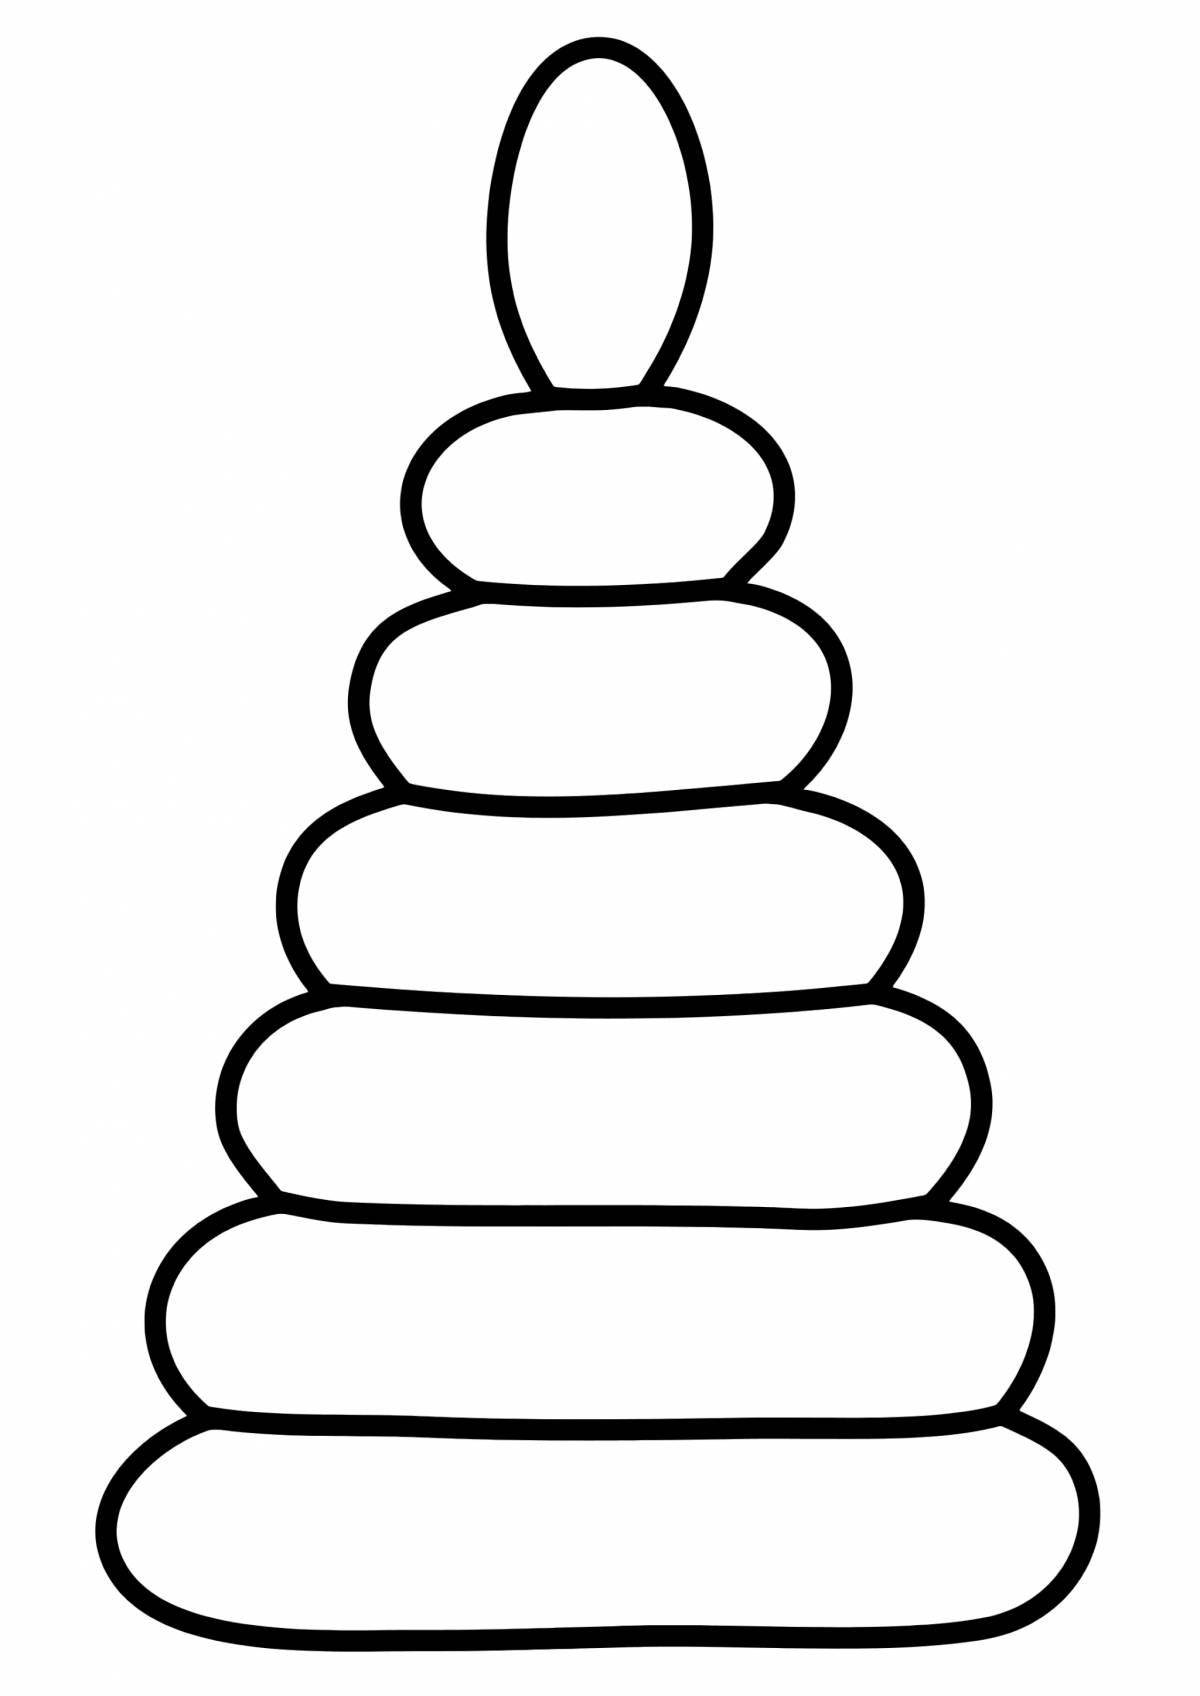 Great pyramid coloring page